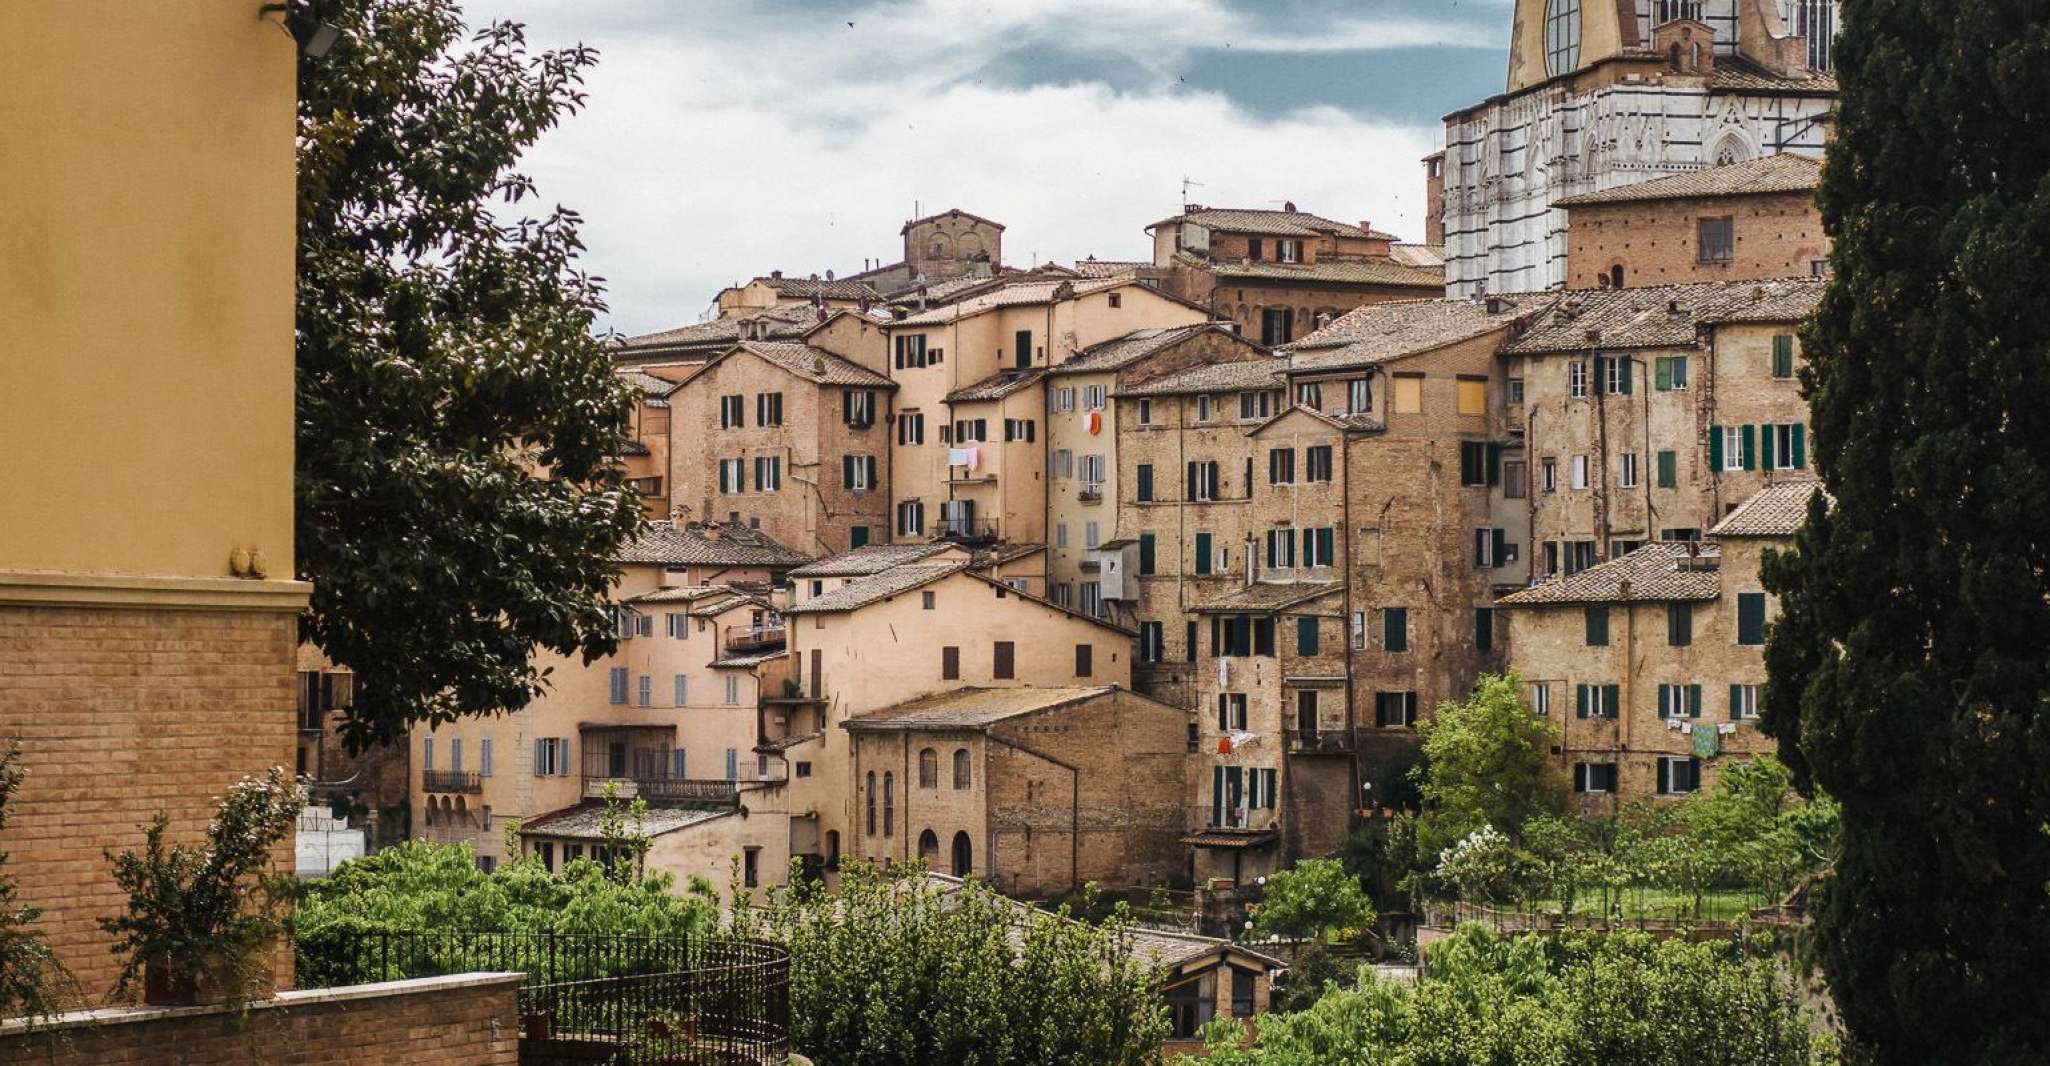 From Florence, Siena, S. Gimignano, Chianti Small Group Tour - Housity